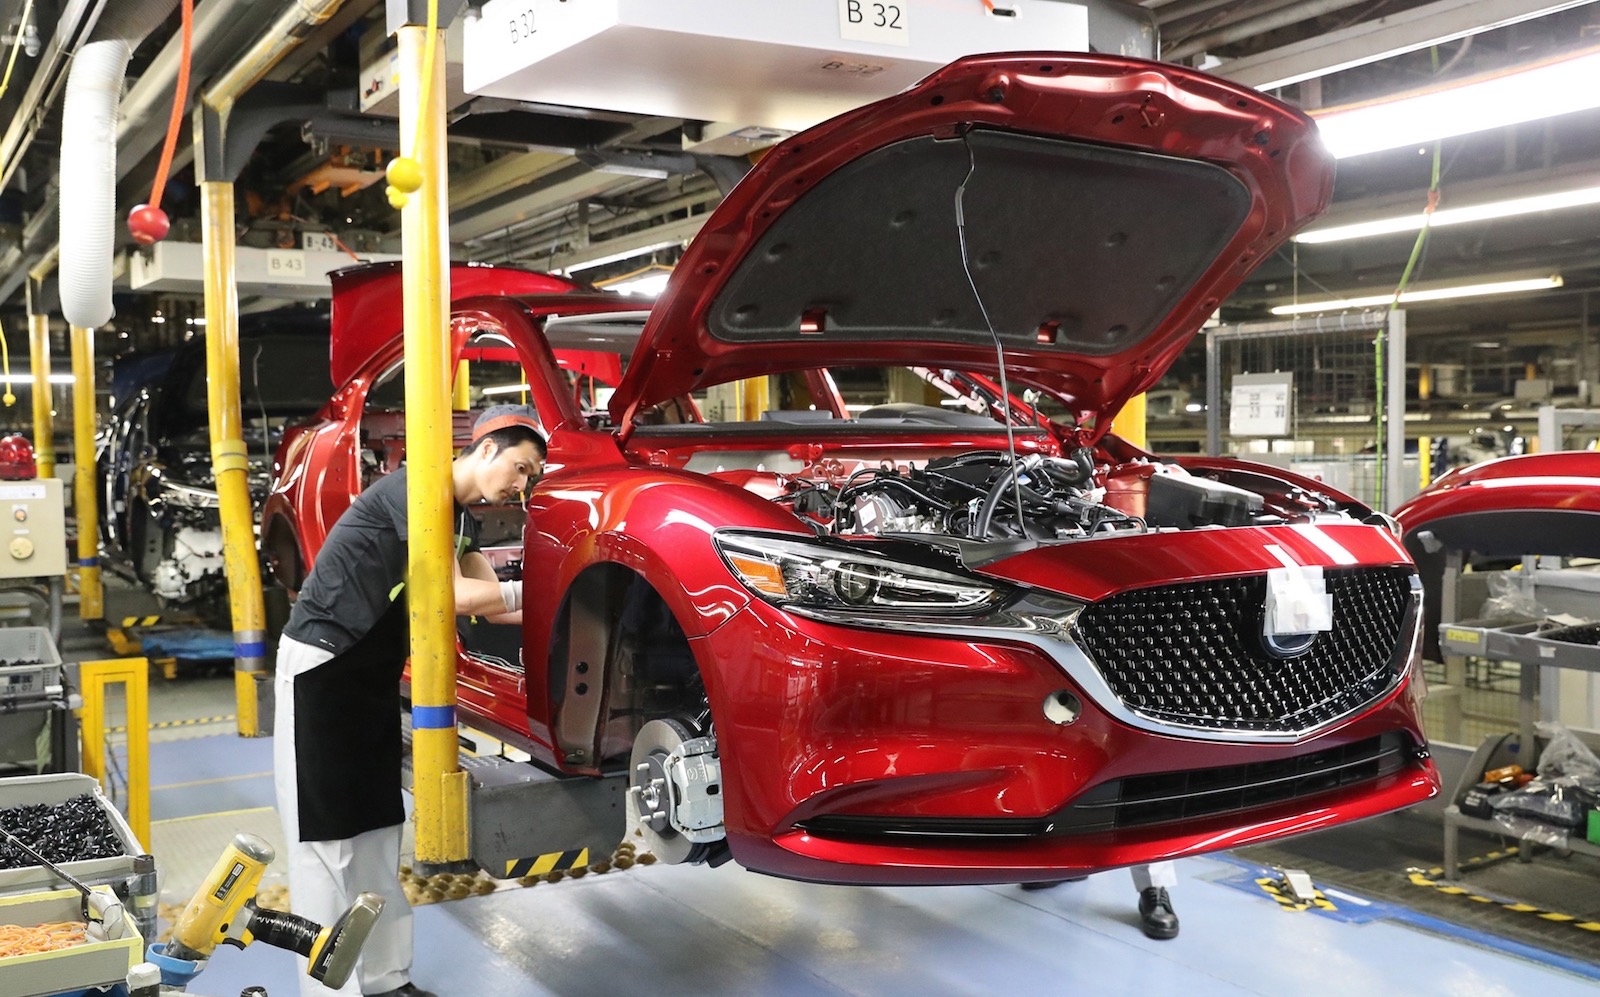 Mazda factories to become carbon neutral by 2035